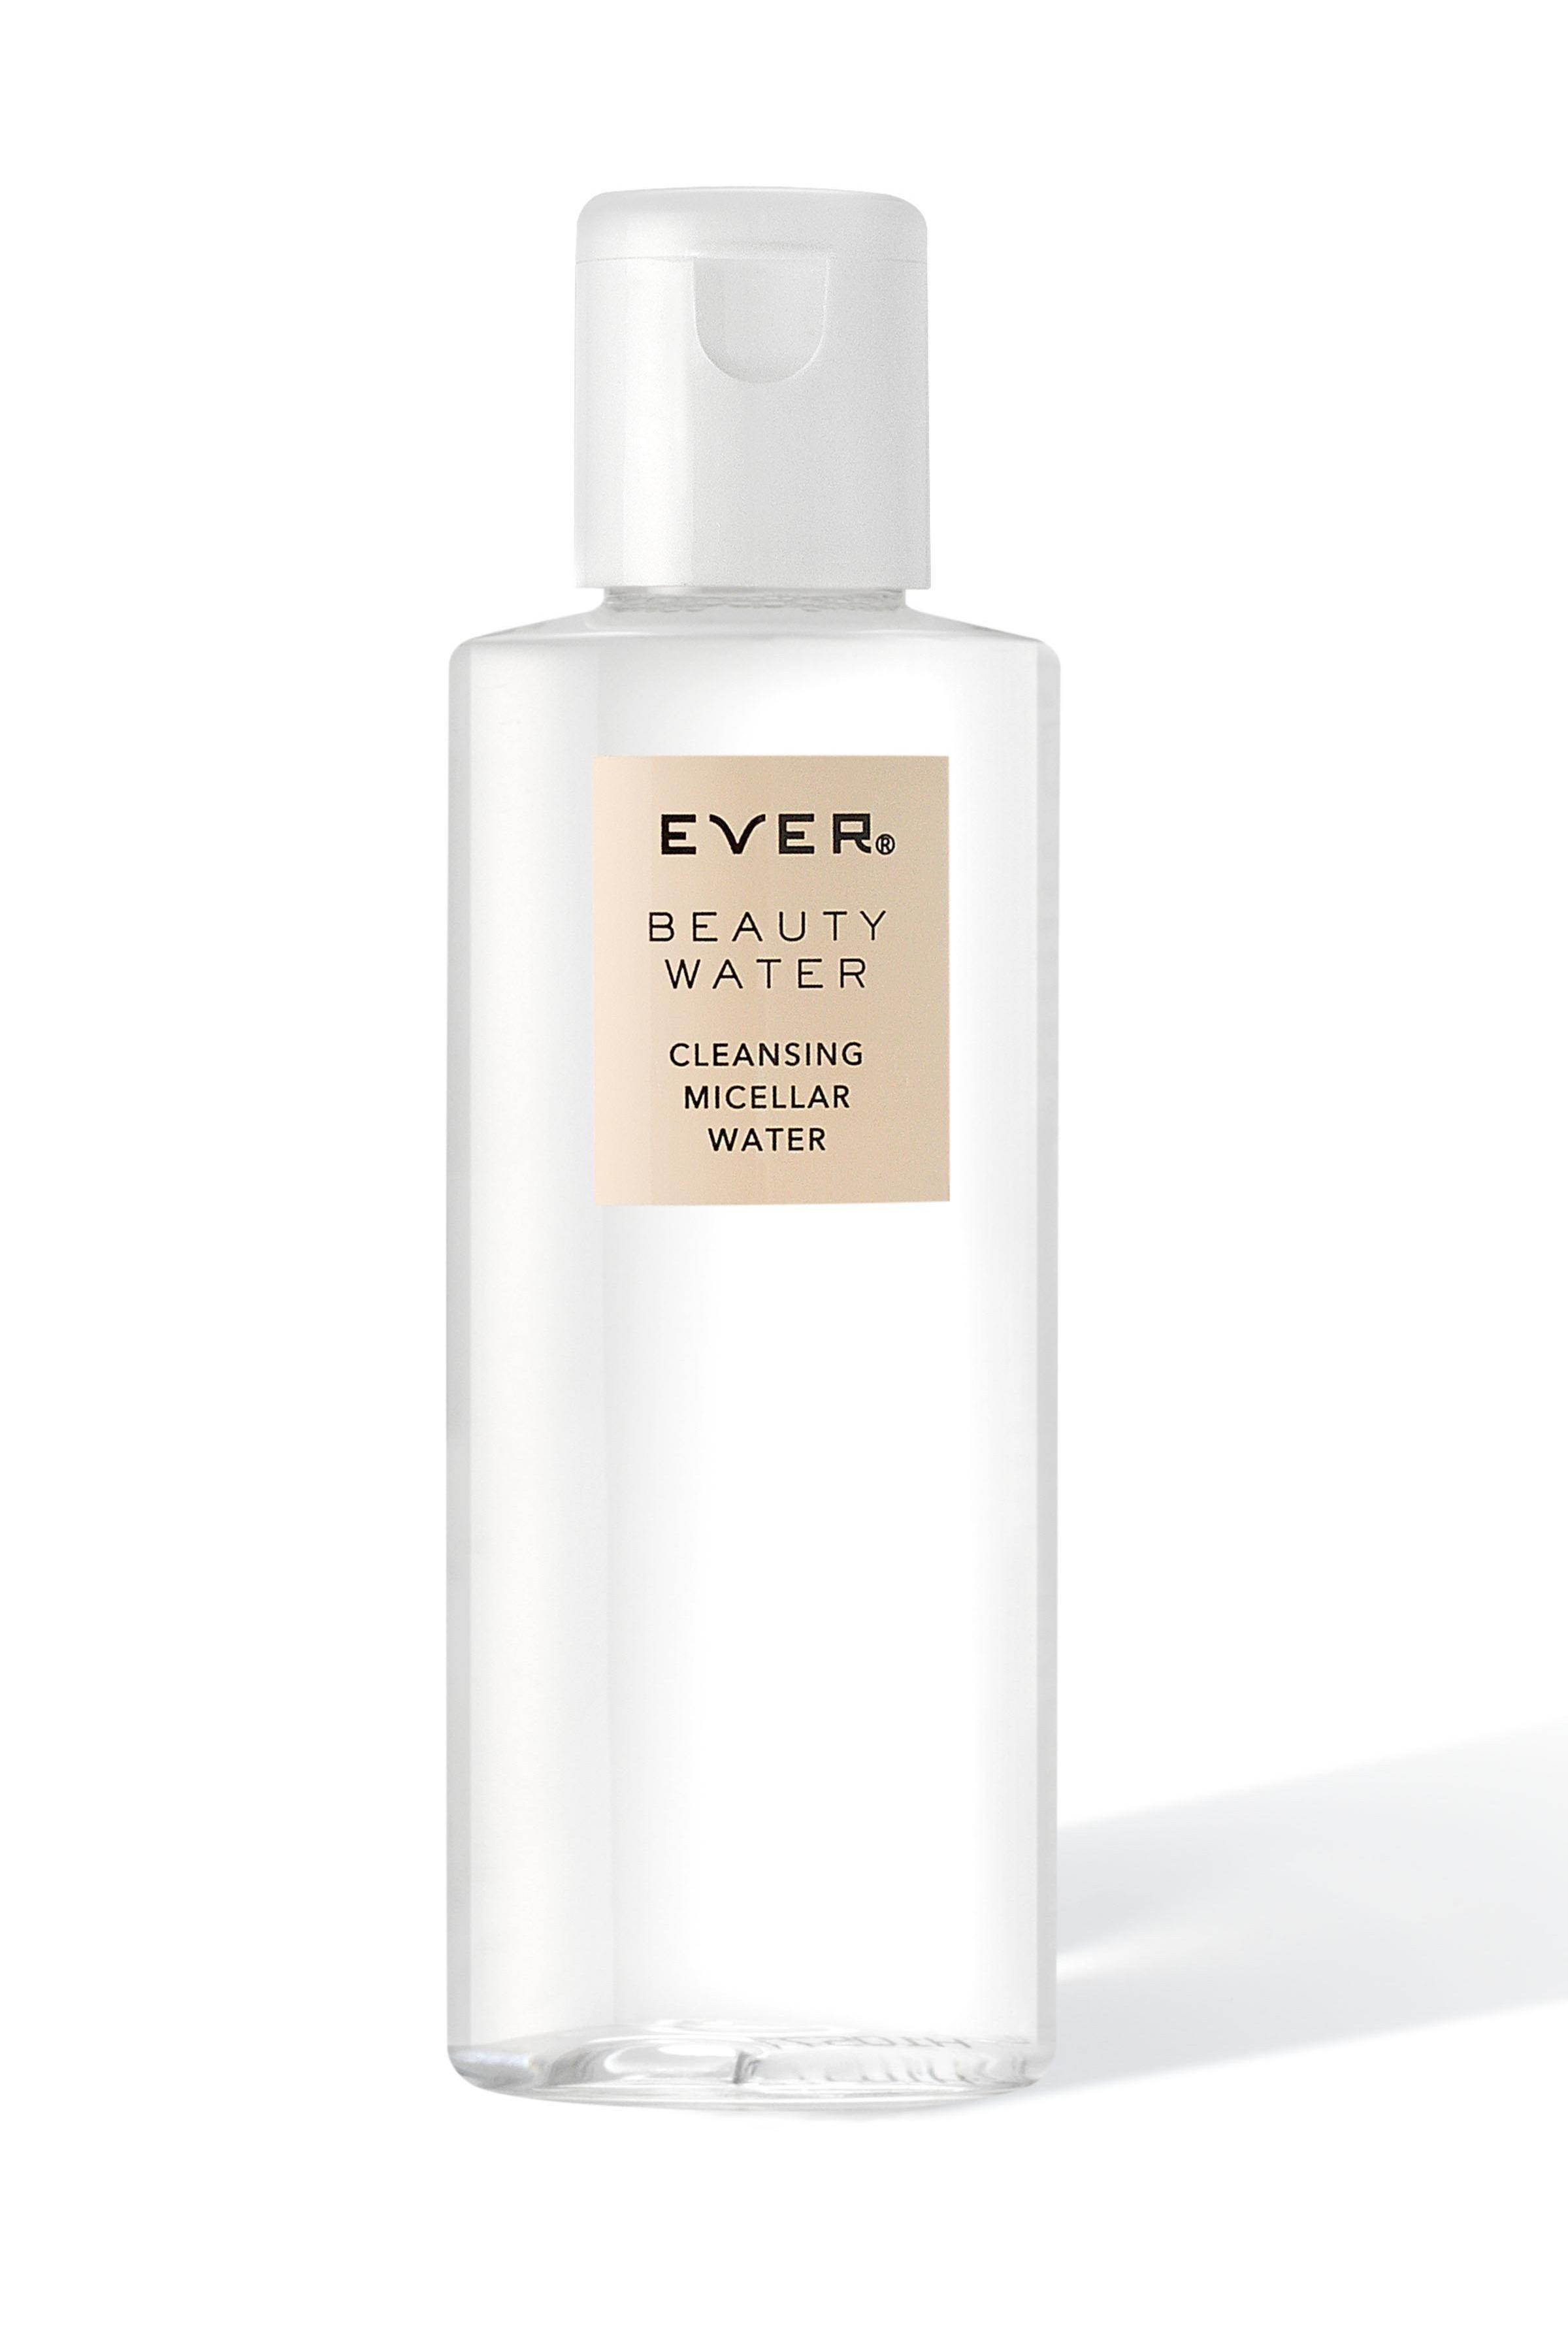 BEAUTY WATER Makeup Removing Cleanser - EVER